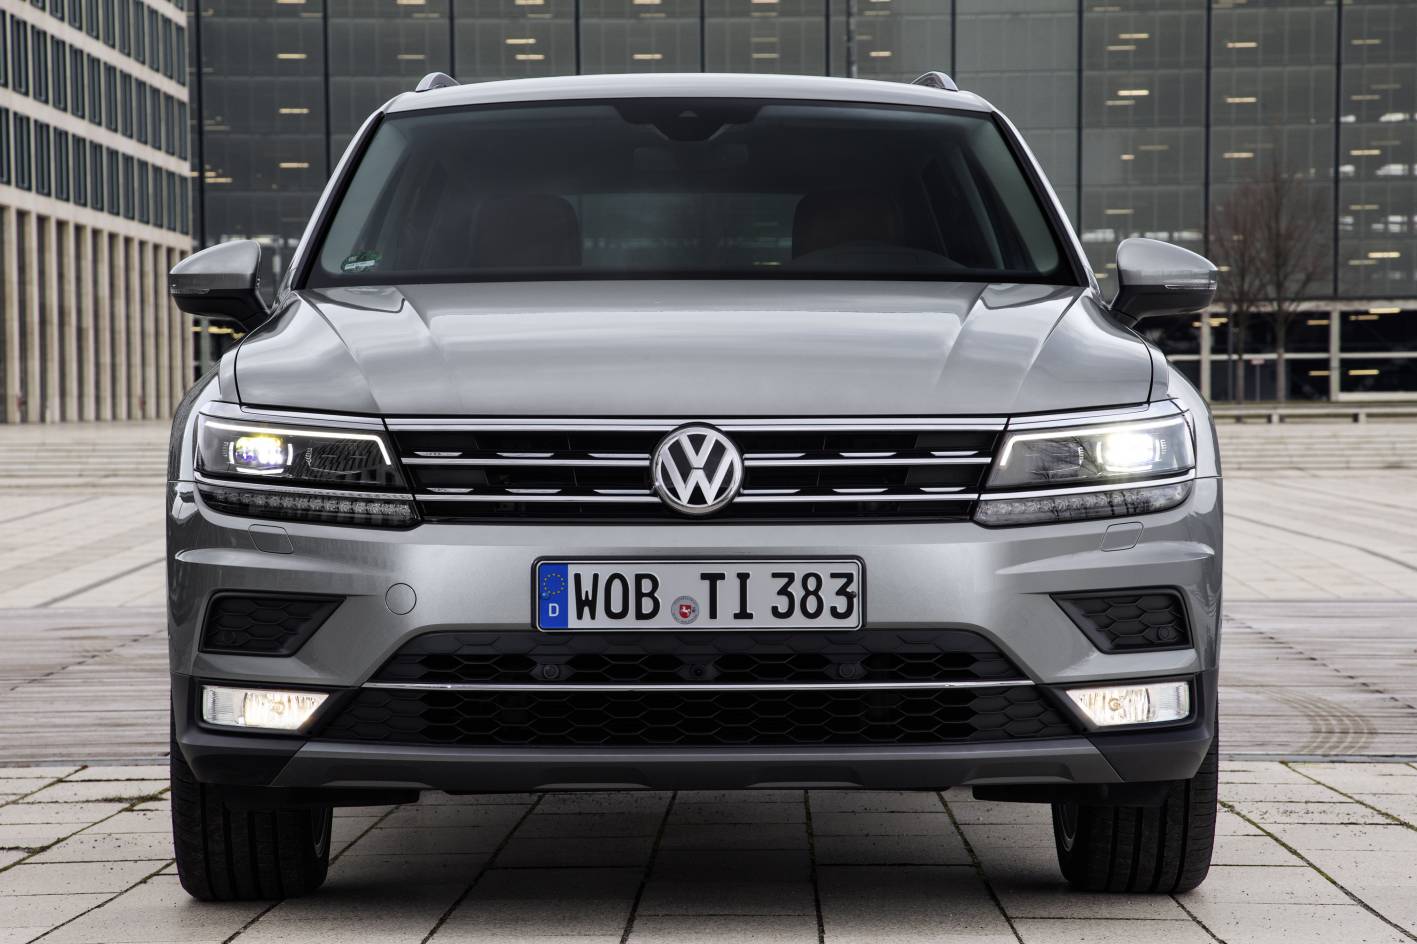 Australians not swayed by VW dieselgate, strong demand for new Tiguan